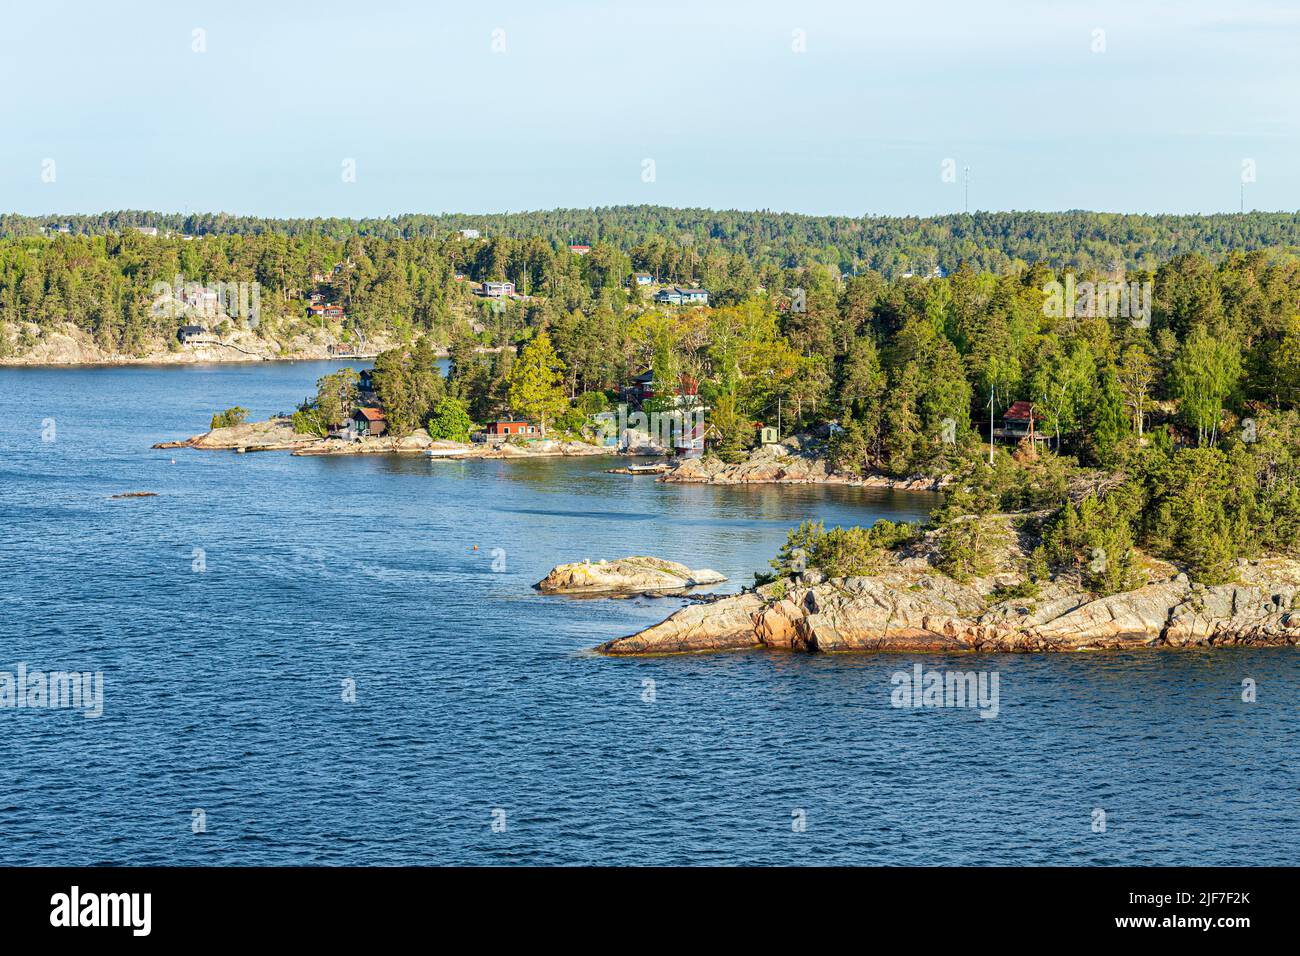 Early morning on some of the many islands of the Stockholm Archipelago near Mjolkon, Sweden Stock Photo